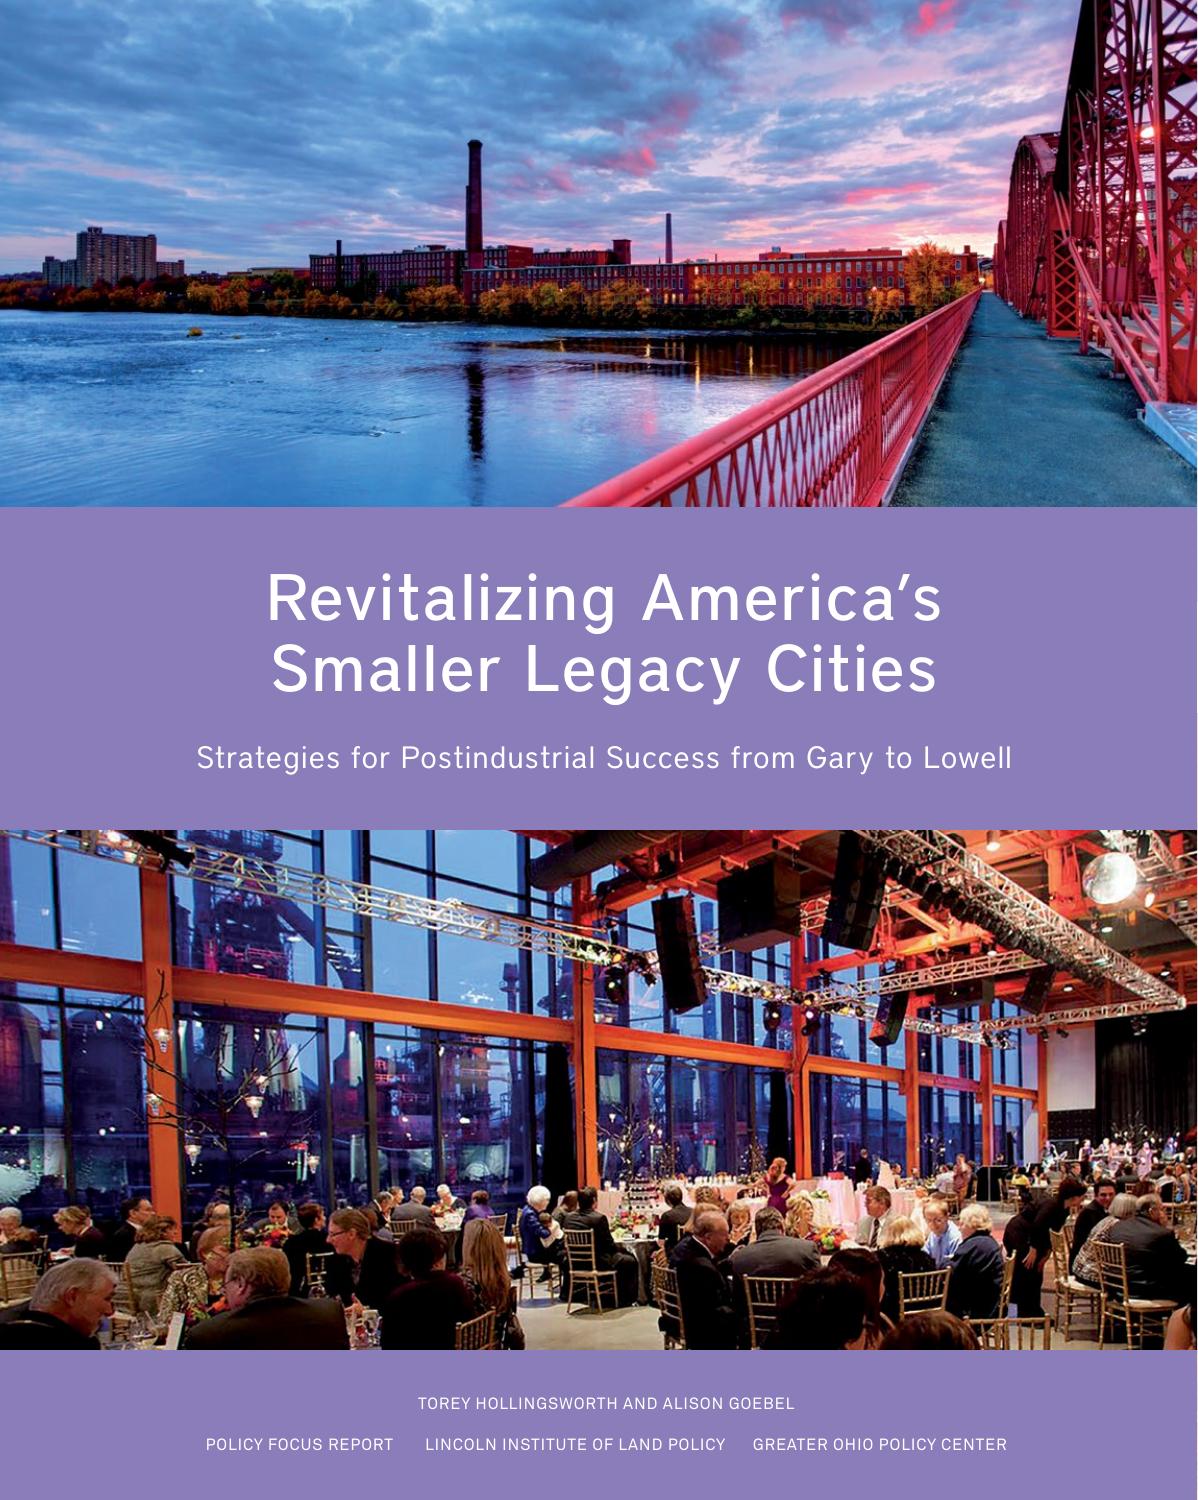 Revitalizing America's Smaller Legacy Cities : Strategies for Postindustrial Success from Gary to Lowell by Torey Hollingsworth; Alison Goebel